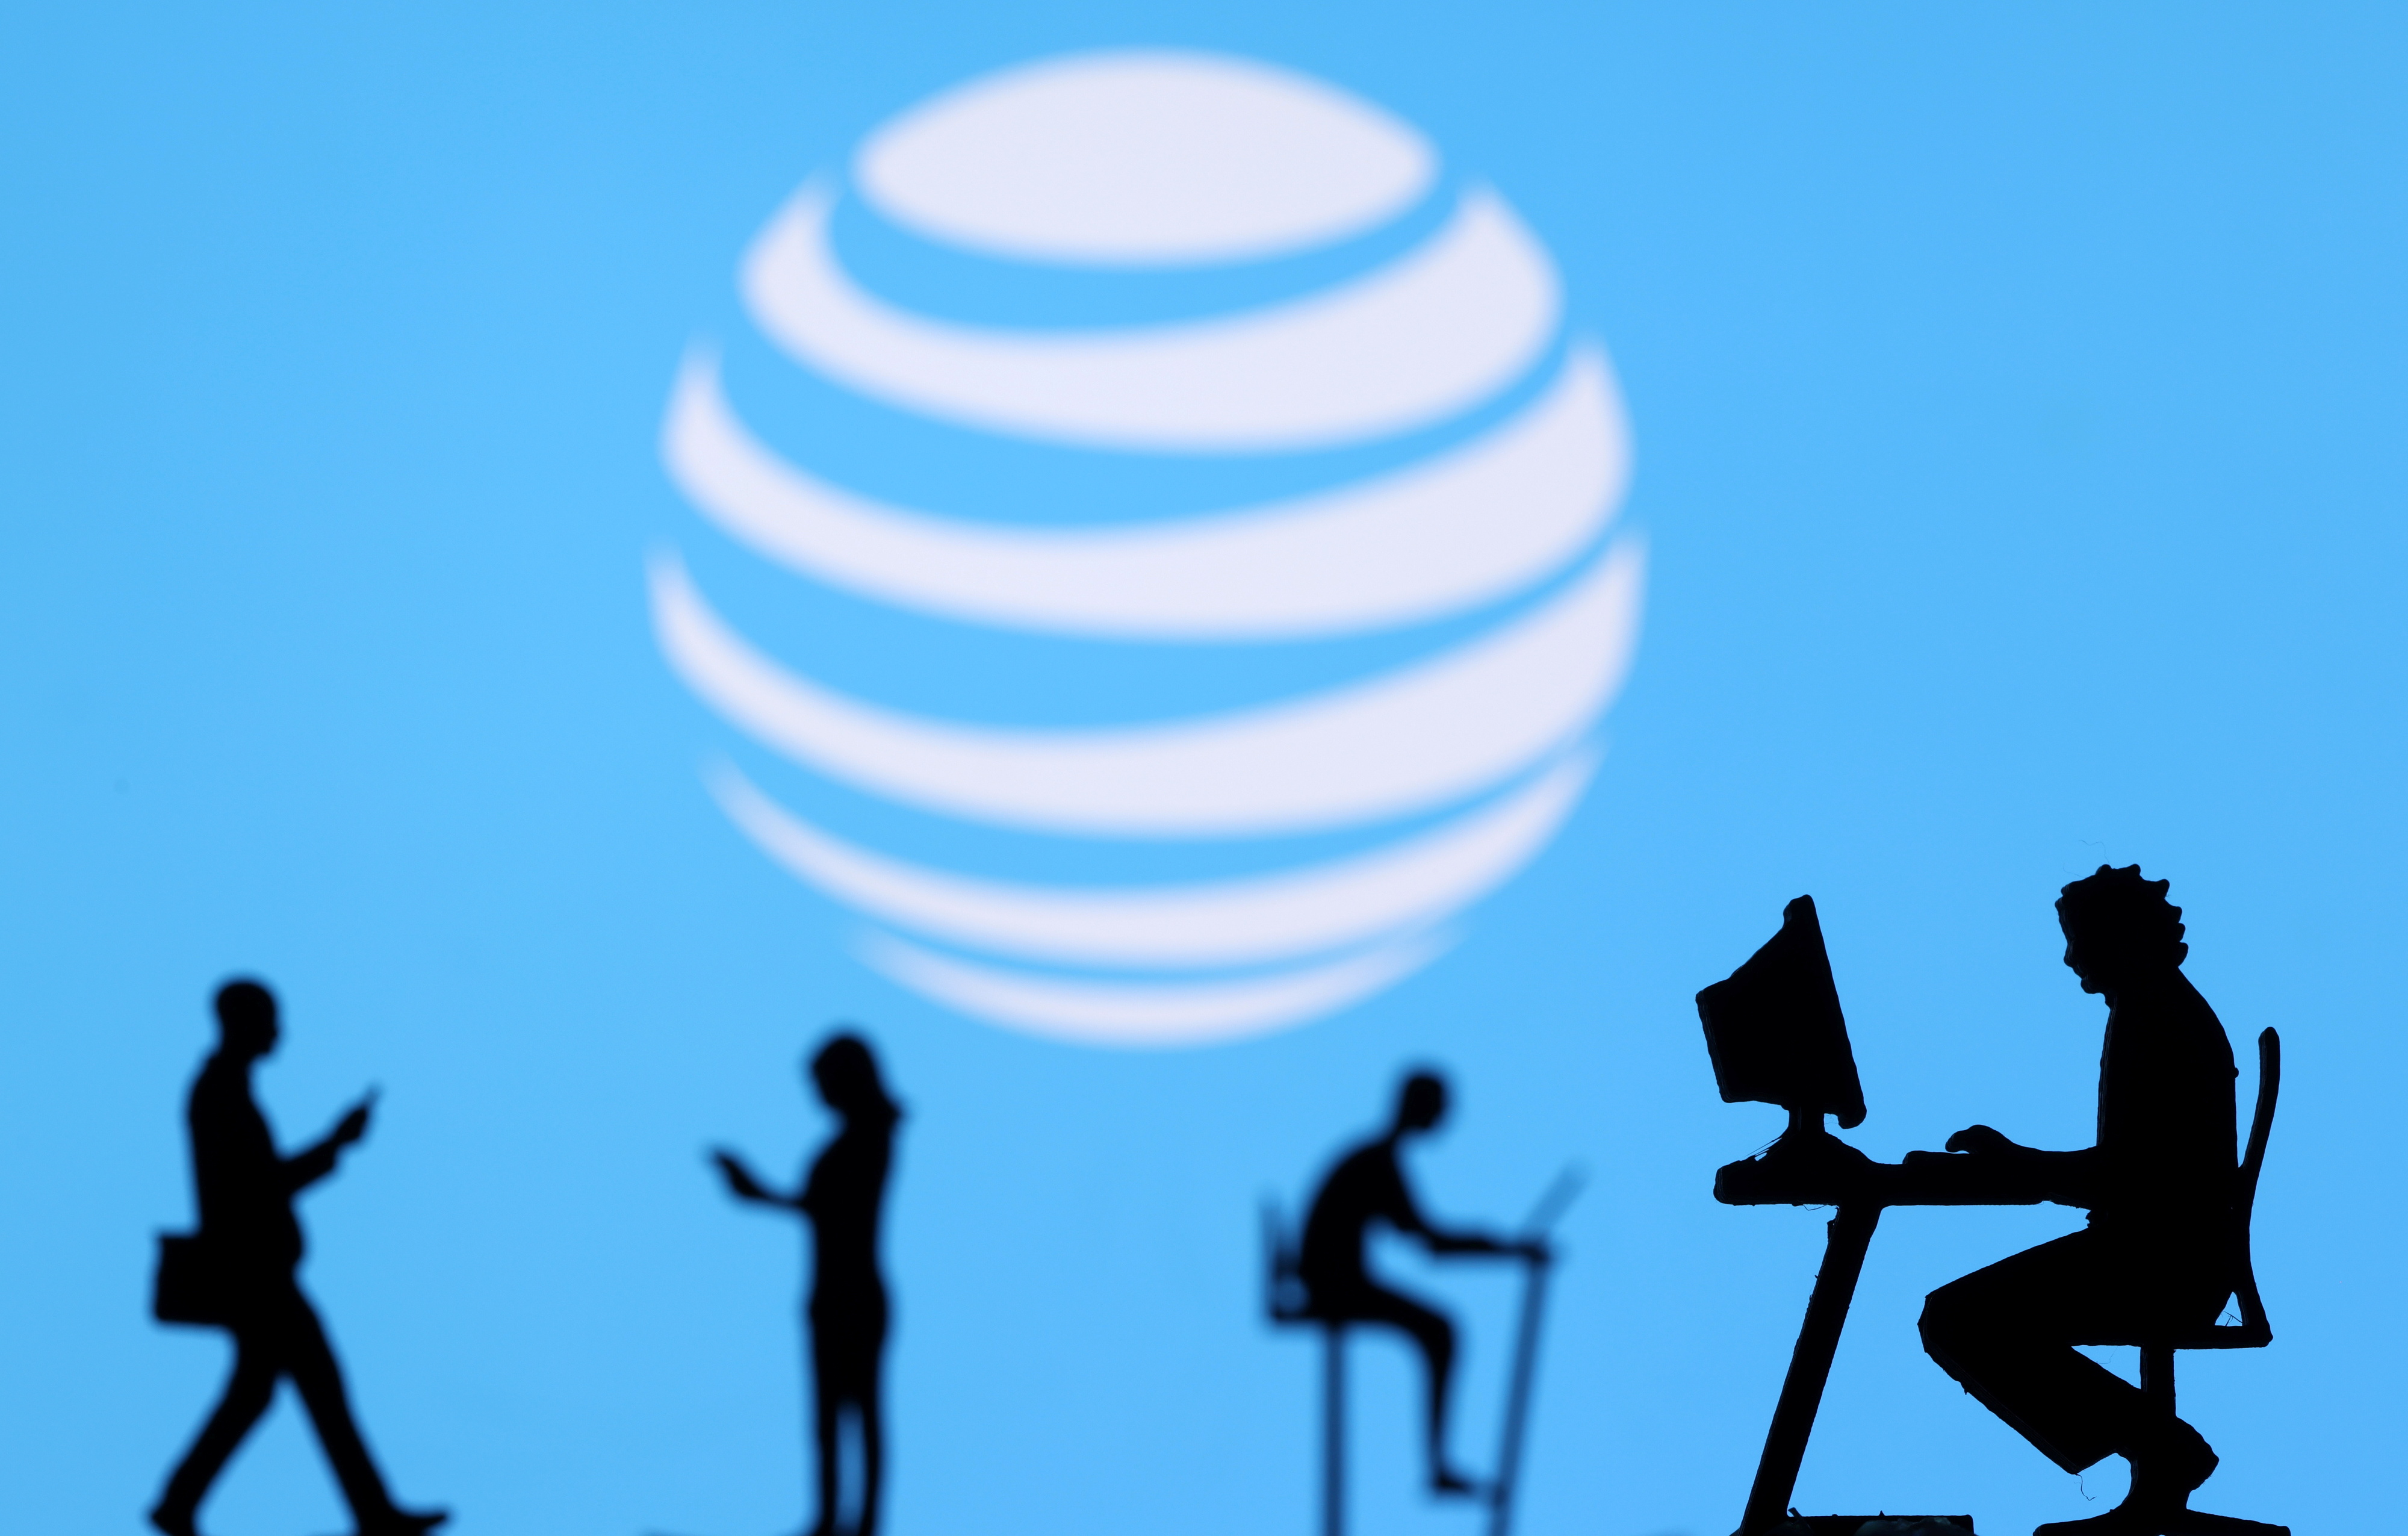 Illustration shows small toy figures with laptops and smartphones in front of displayed AT&T logo